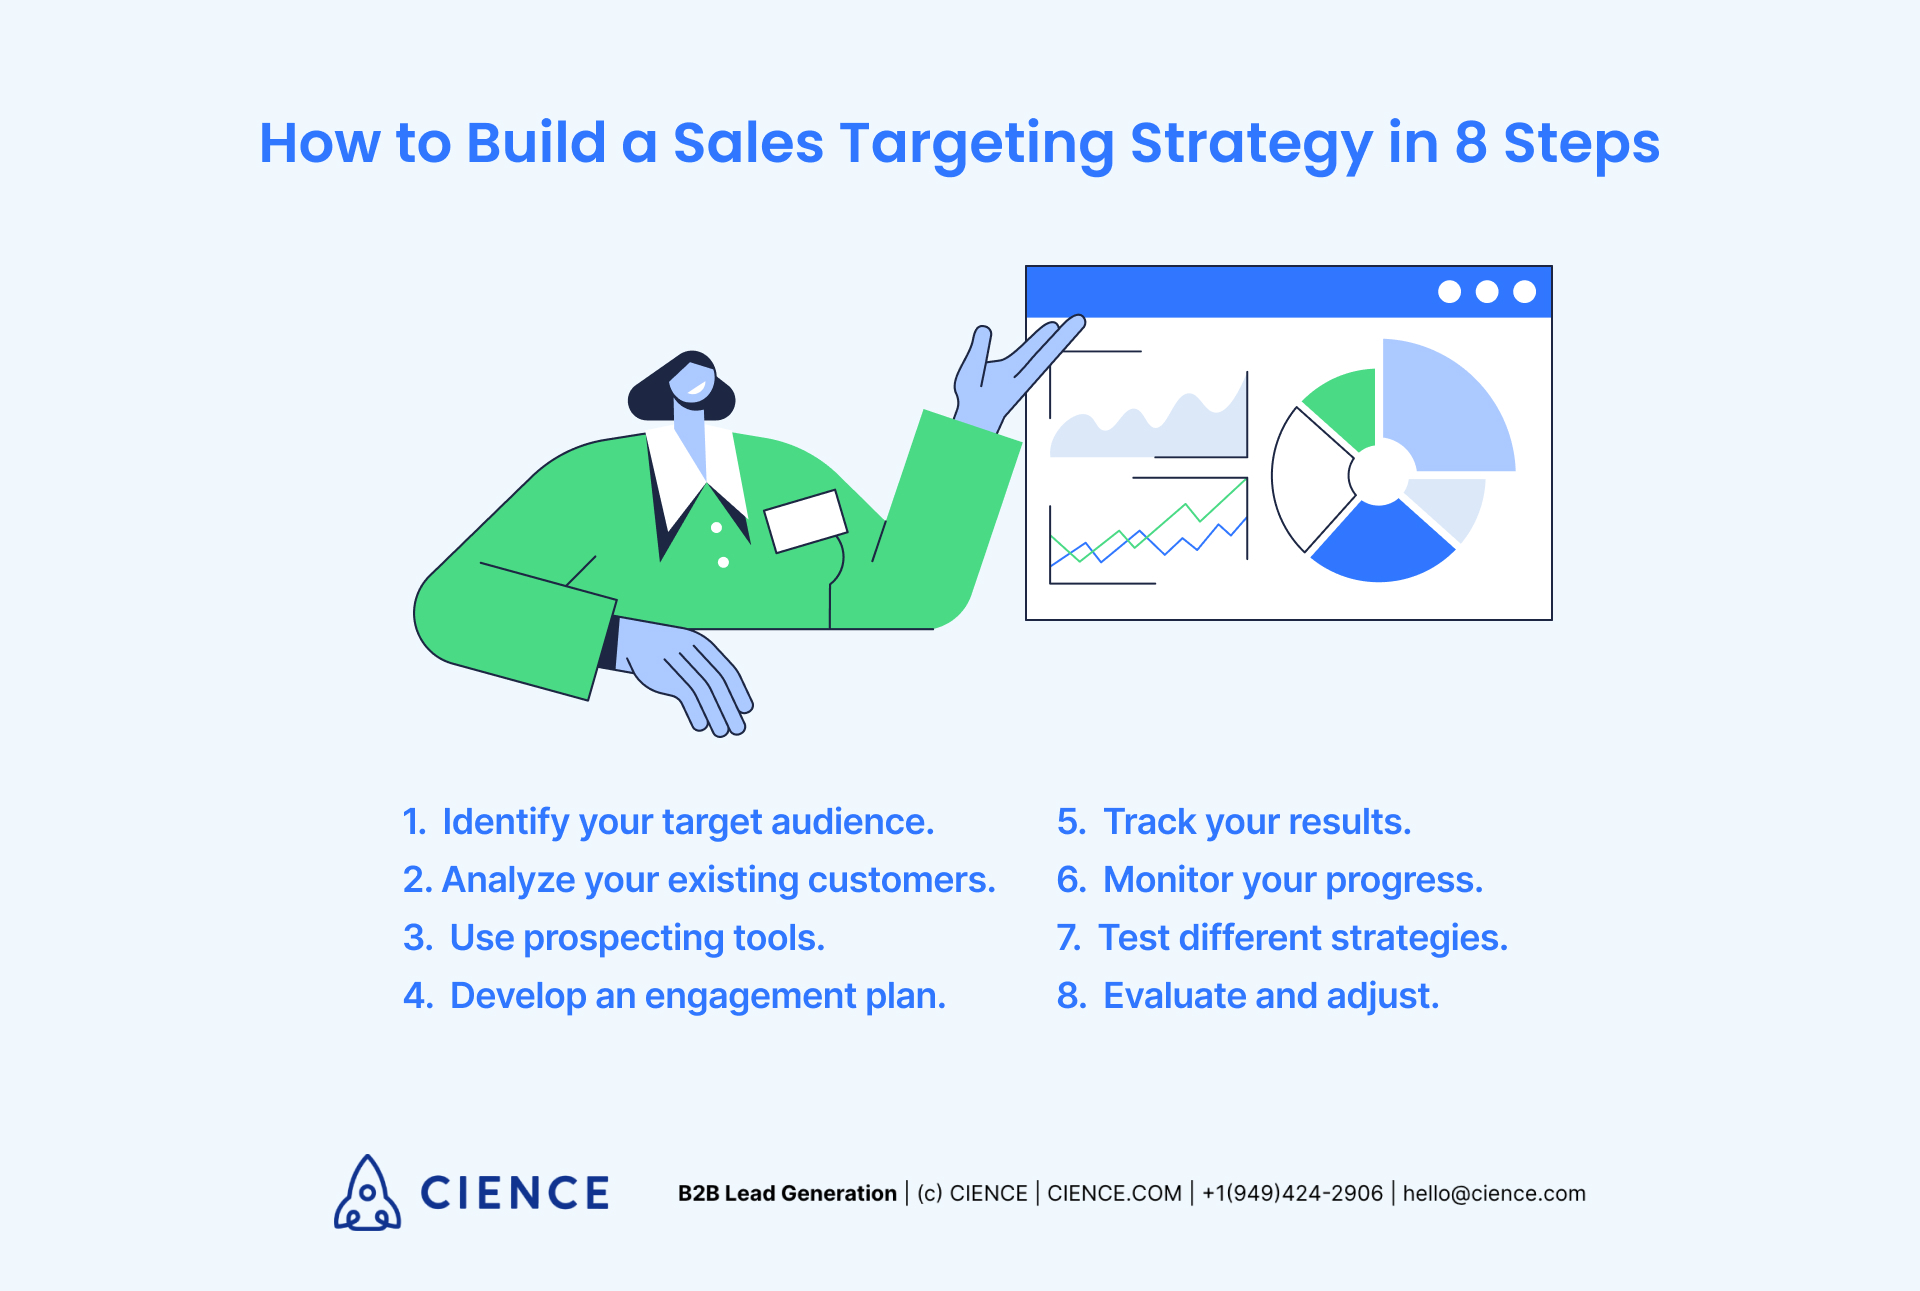 How to Build a Sales Targeting Strategy